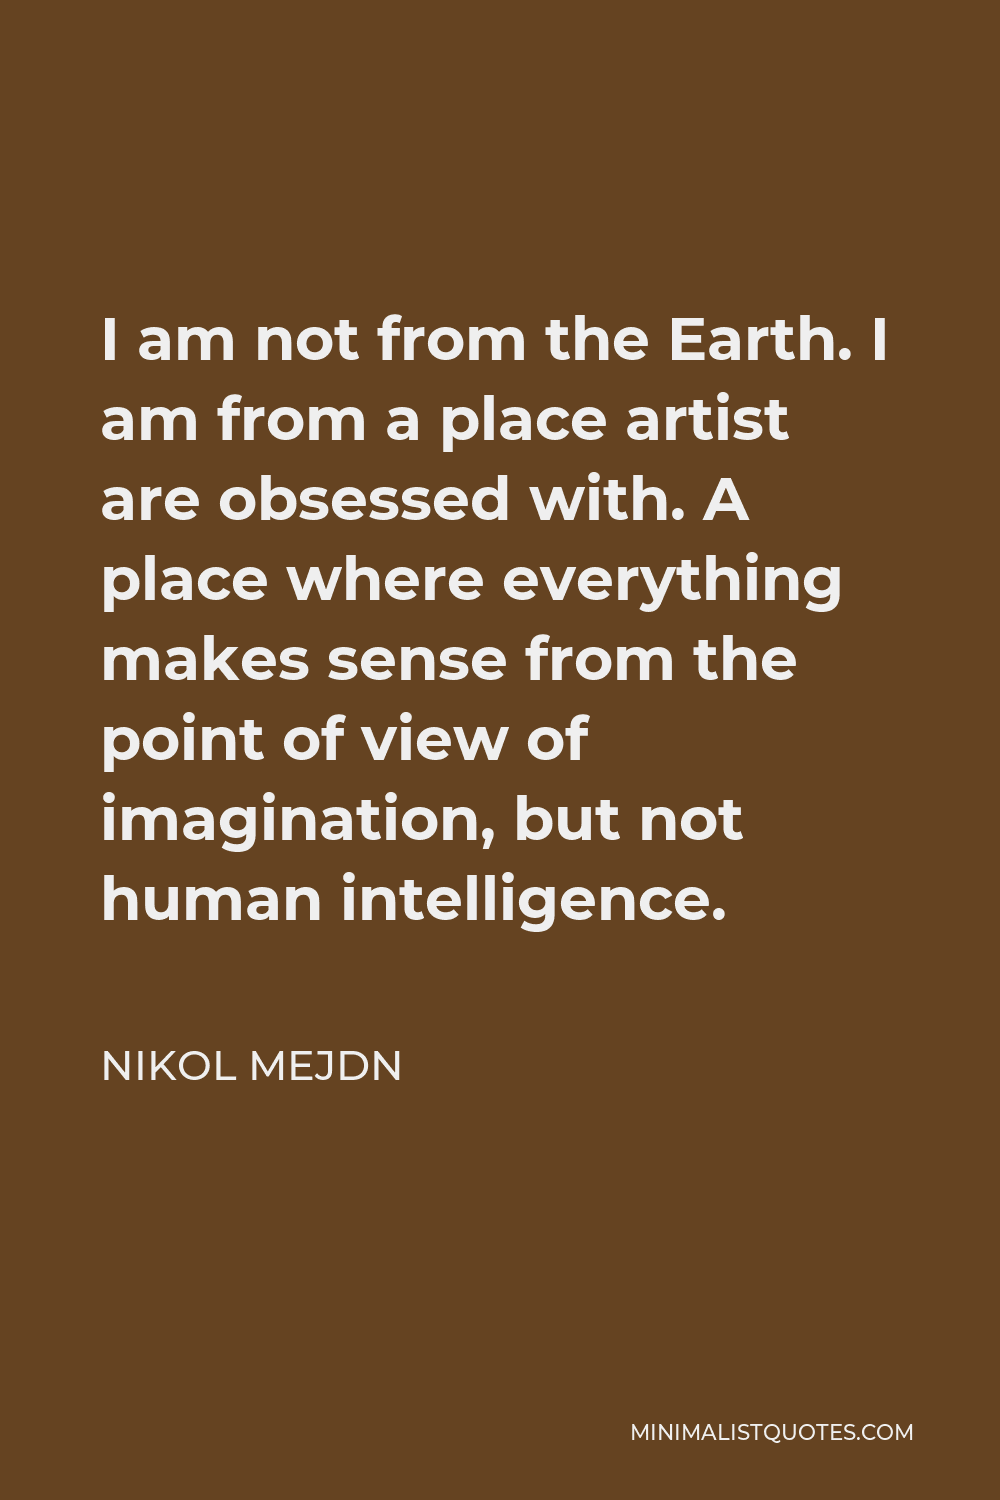 Nikol Mejdn Quote - I am not from the Earth. I am from a place artist are obsessed with. A place where everything makes sense from the point of view of imagination, but not human intelligence.